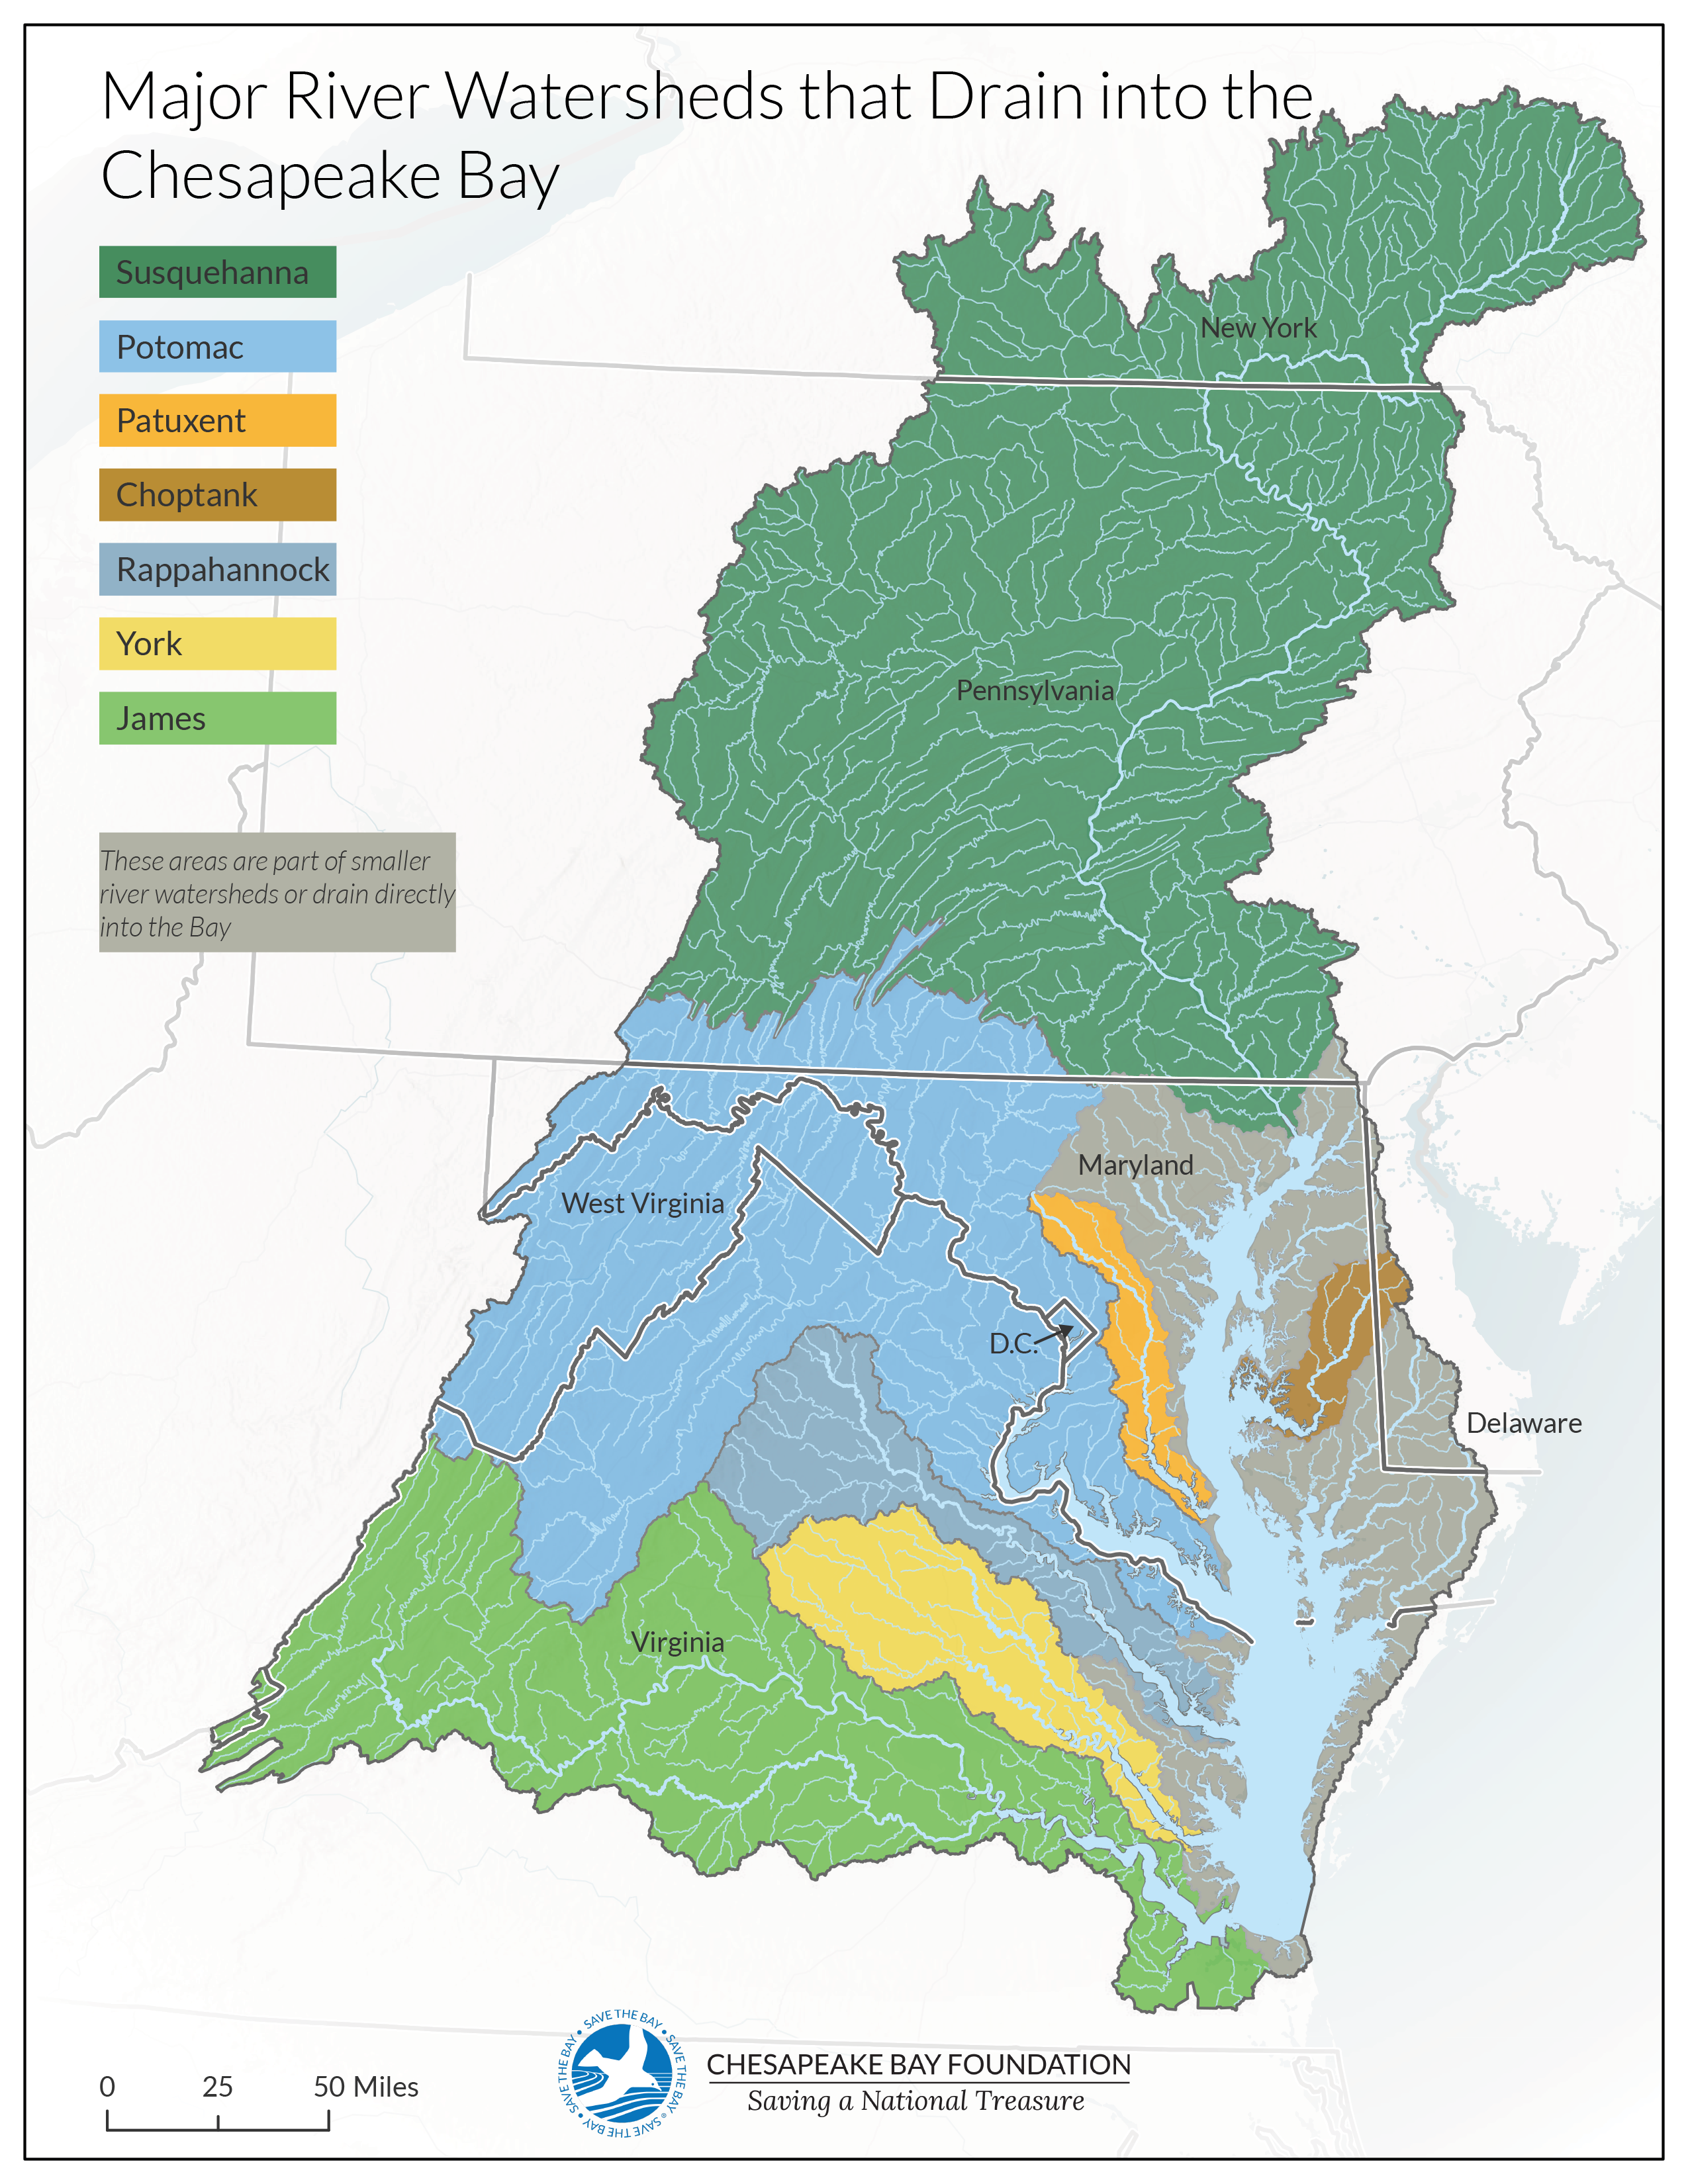 Map of the Chesapeake Bay watershed showing the Susquehanna, Potomac, Patuxent, Choptank, Rappahannock, York, and James watersheds.